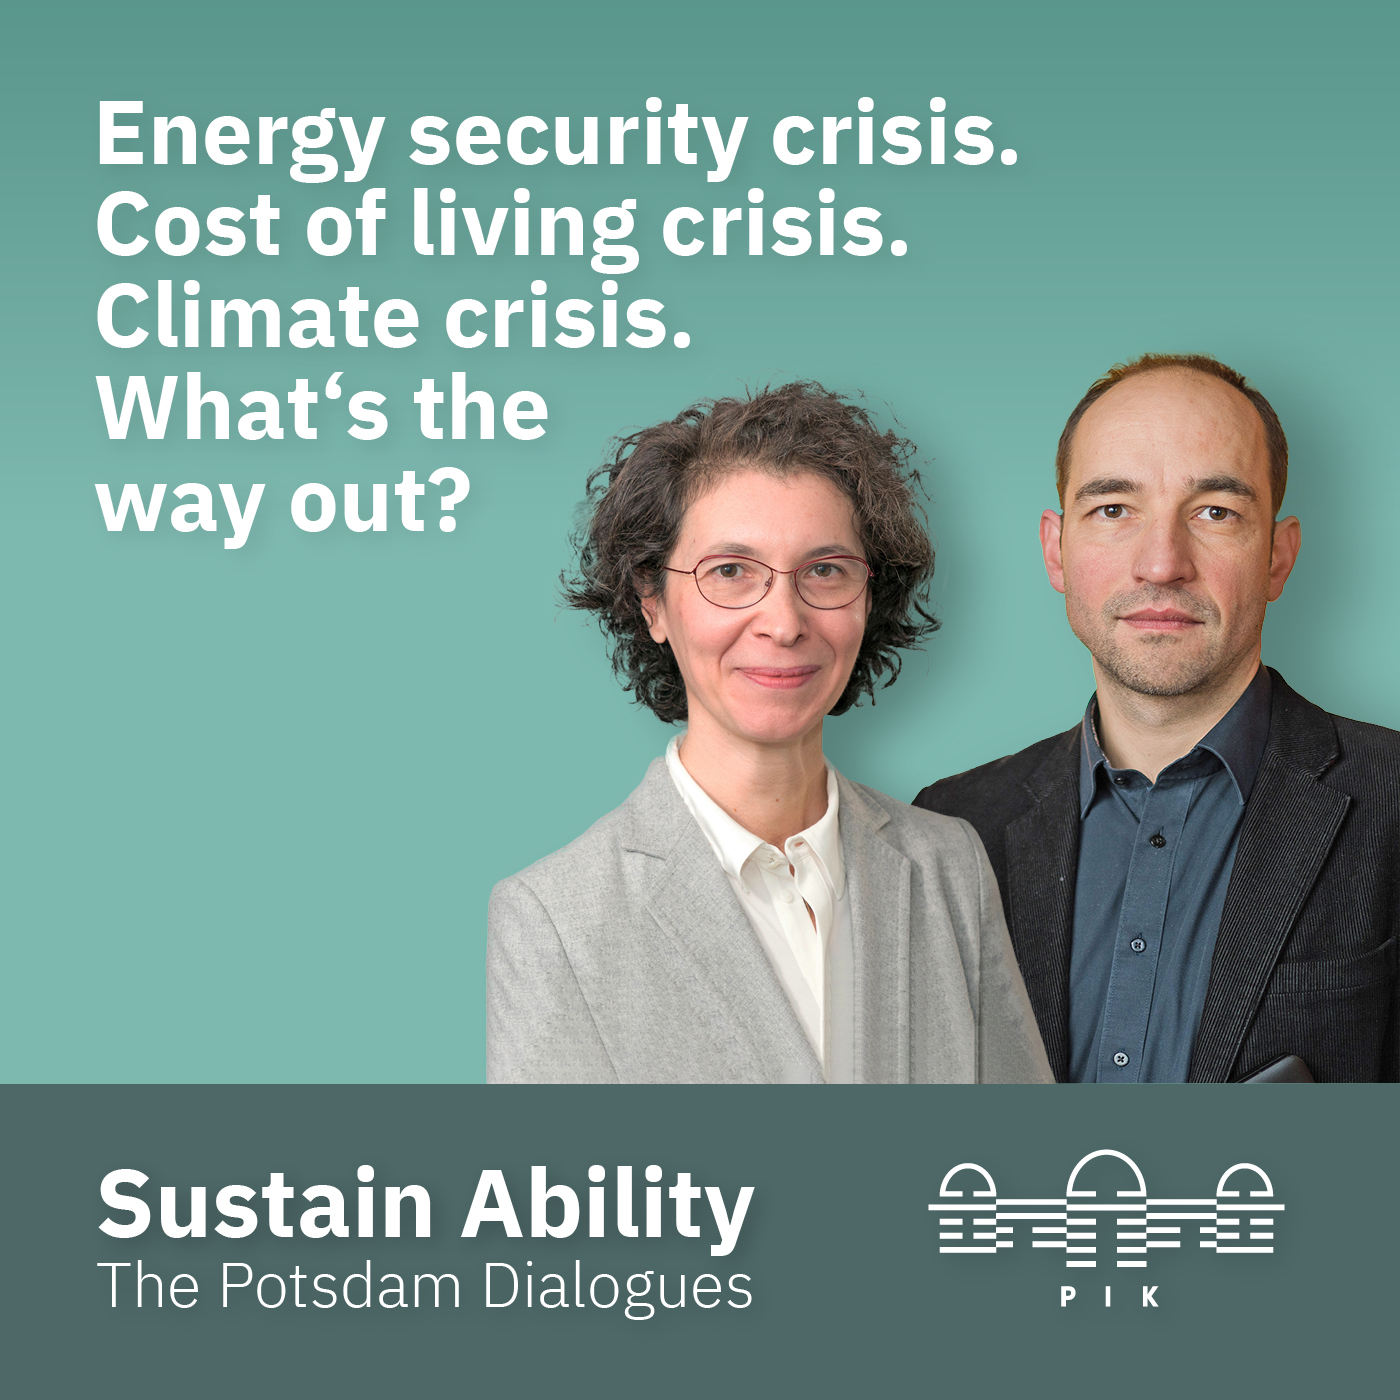 New PIK Podcast: Energy security crisis. Cost of living crisis. Climate Crisis. What's the way out?